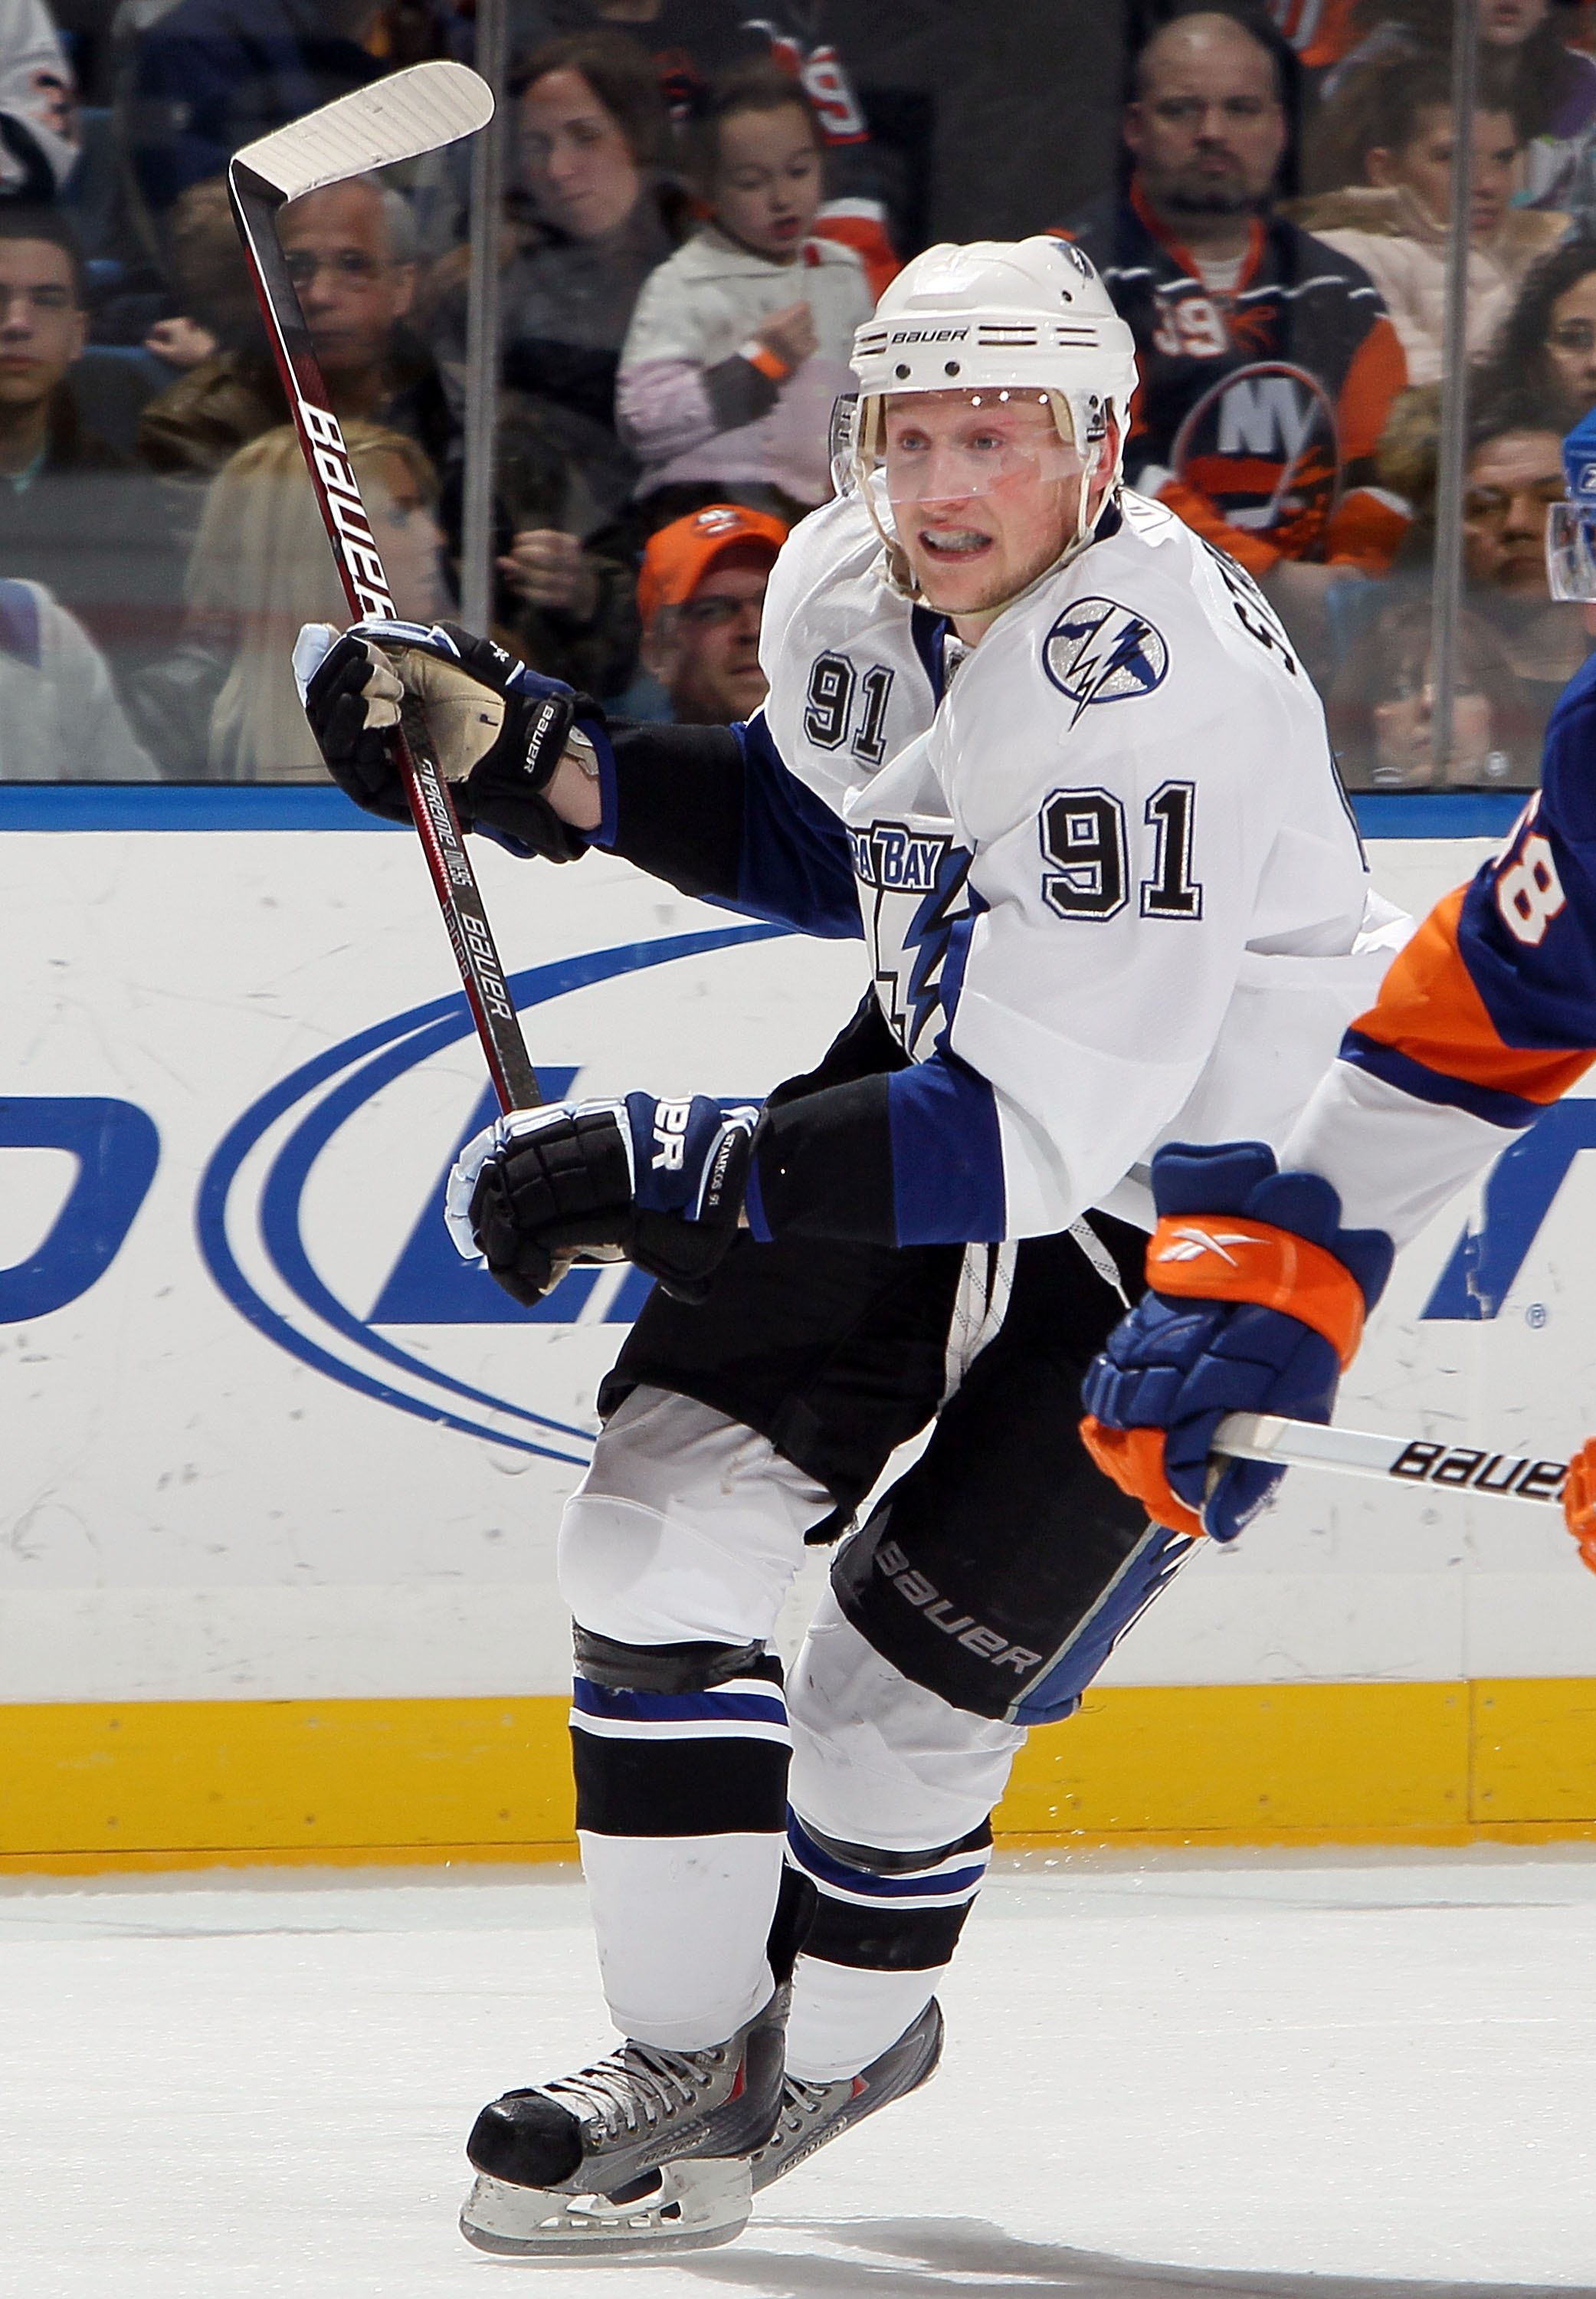 UNIONDALE, NY - FEBRUARY 13:  Steven Stamkos #91 of the Tampa Bay Lightning skates against the New York Islanders on February 13, 2010 at Nassau Coliseum in Uniondale, New York. The Isles defeated the Lightning 5-4.  (Photo by Jim McIsaac/Getty Images)